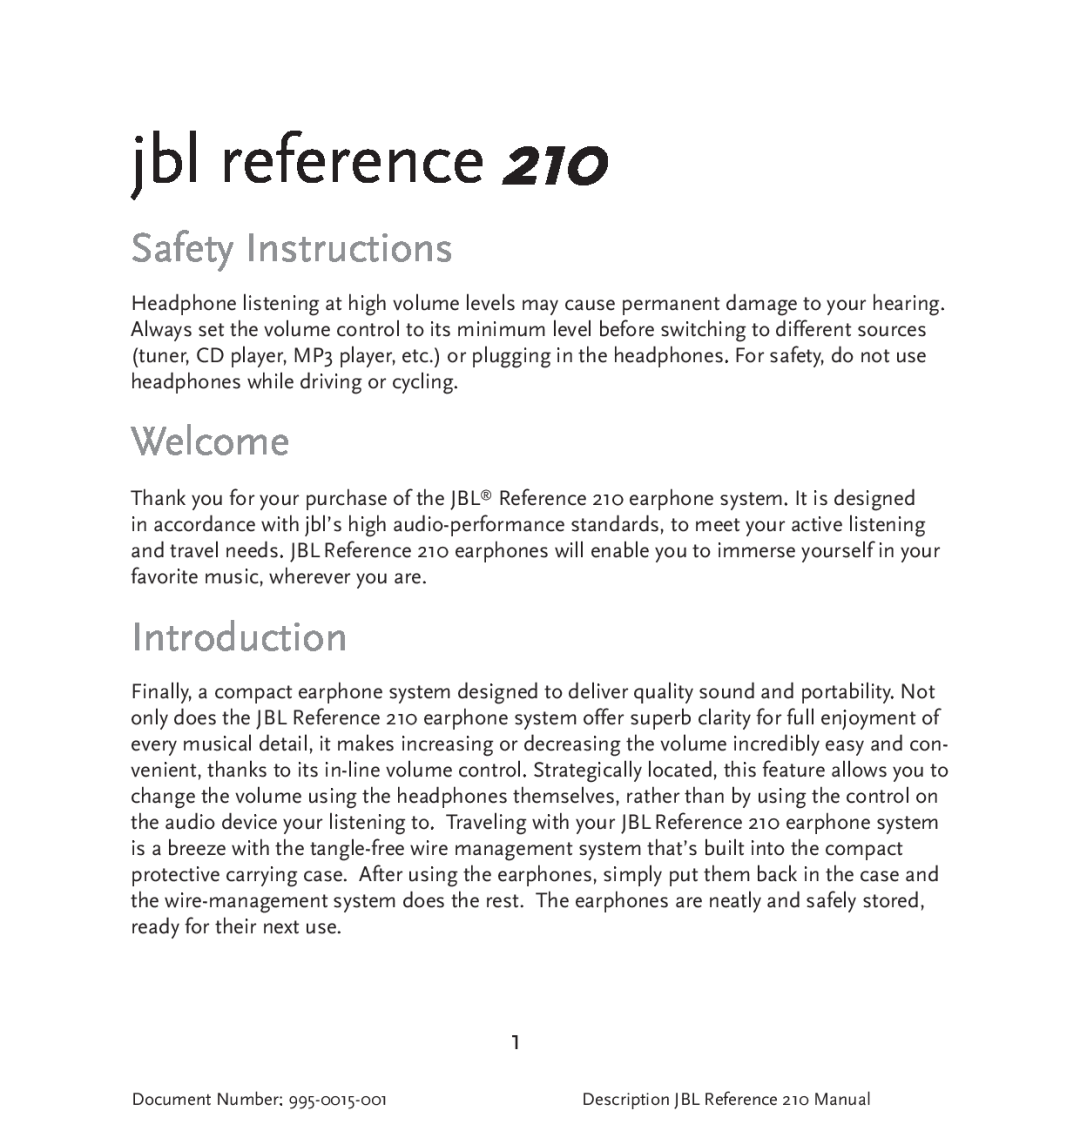 JBL 210 manual jbl reference, Safety Instructions, Welcome, Introduction 